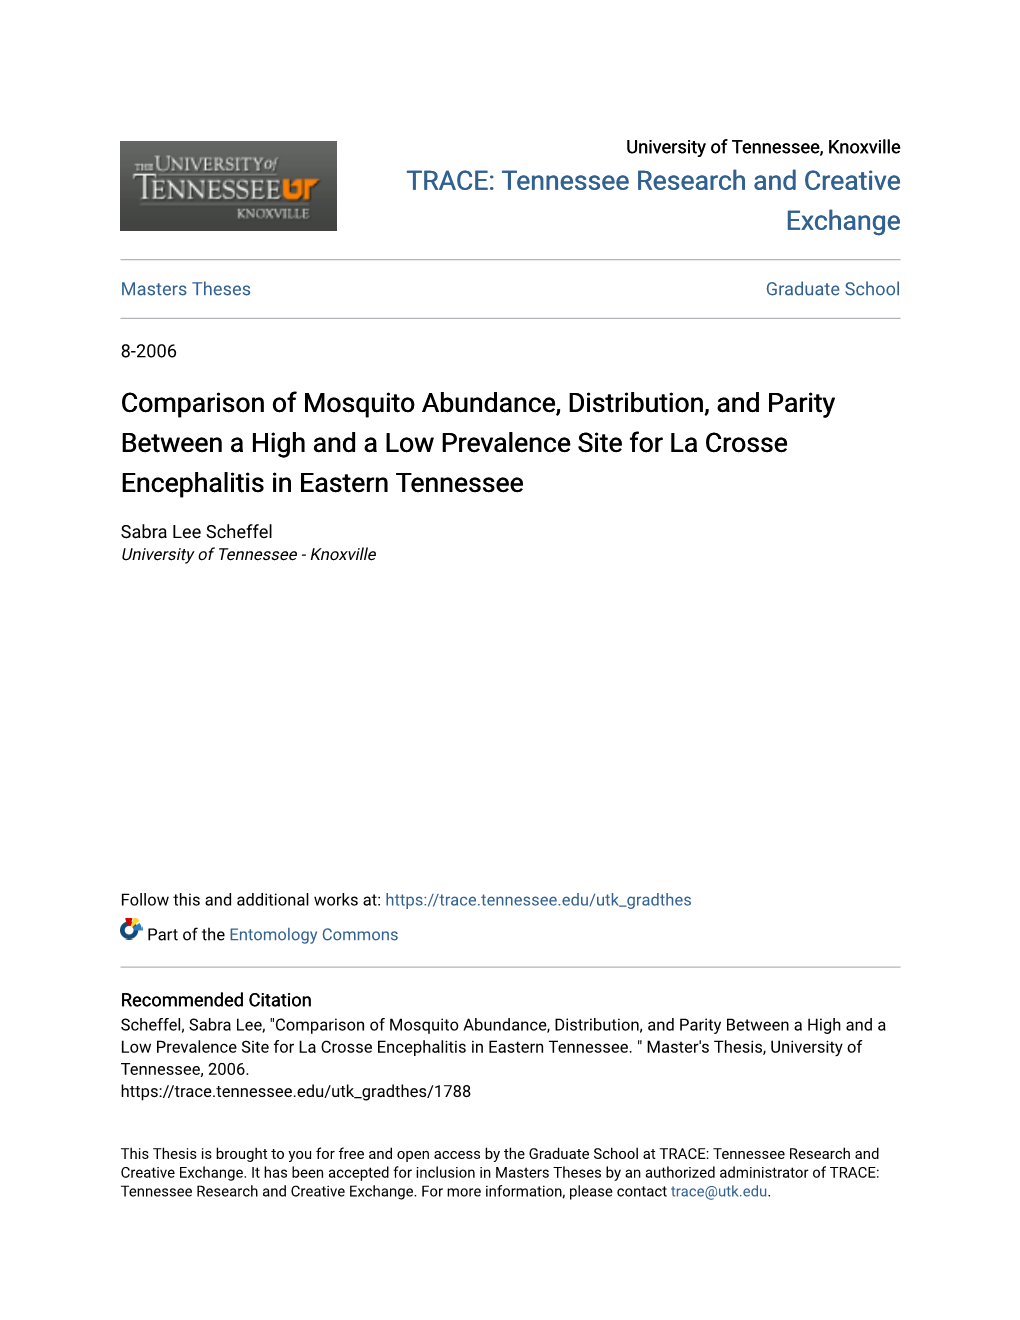 Comparison of Mosquito Abundance, Distribution, and Parity Between a High and a Low Prevalence Site for La Crosse Encephalitis in Eastern Tennessee